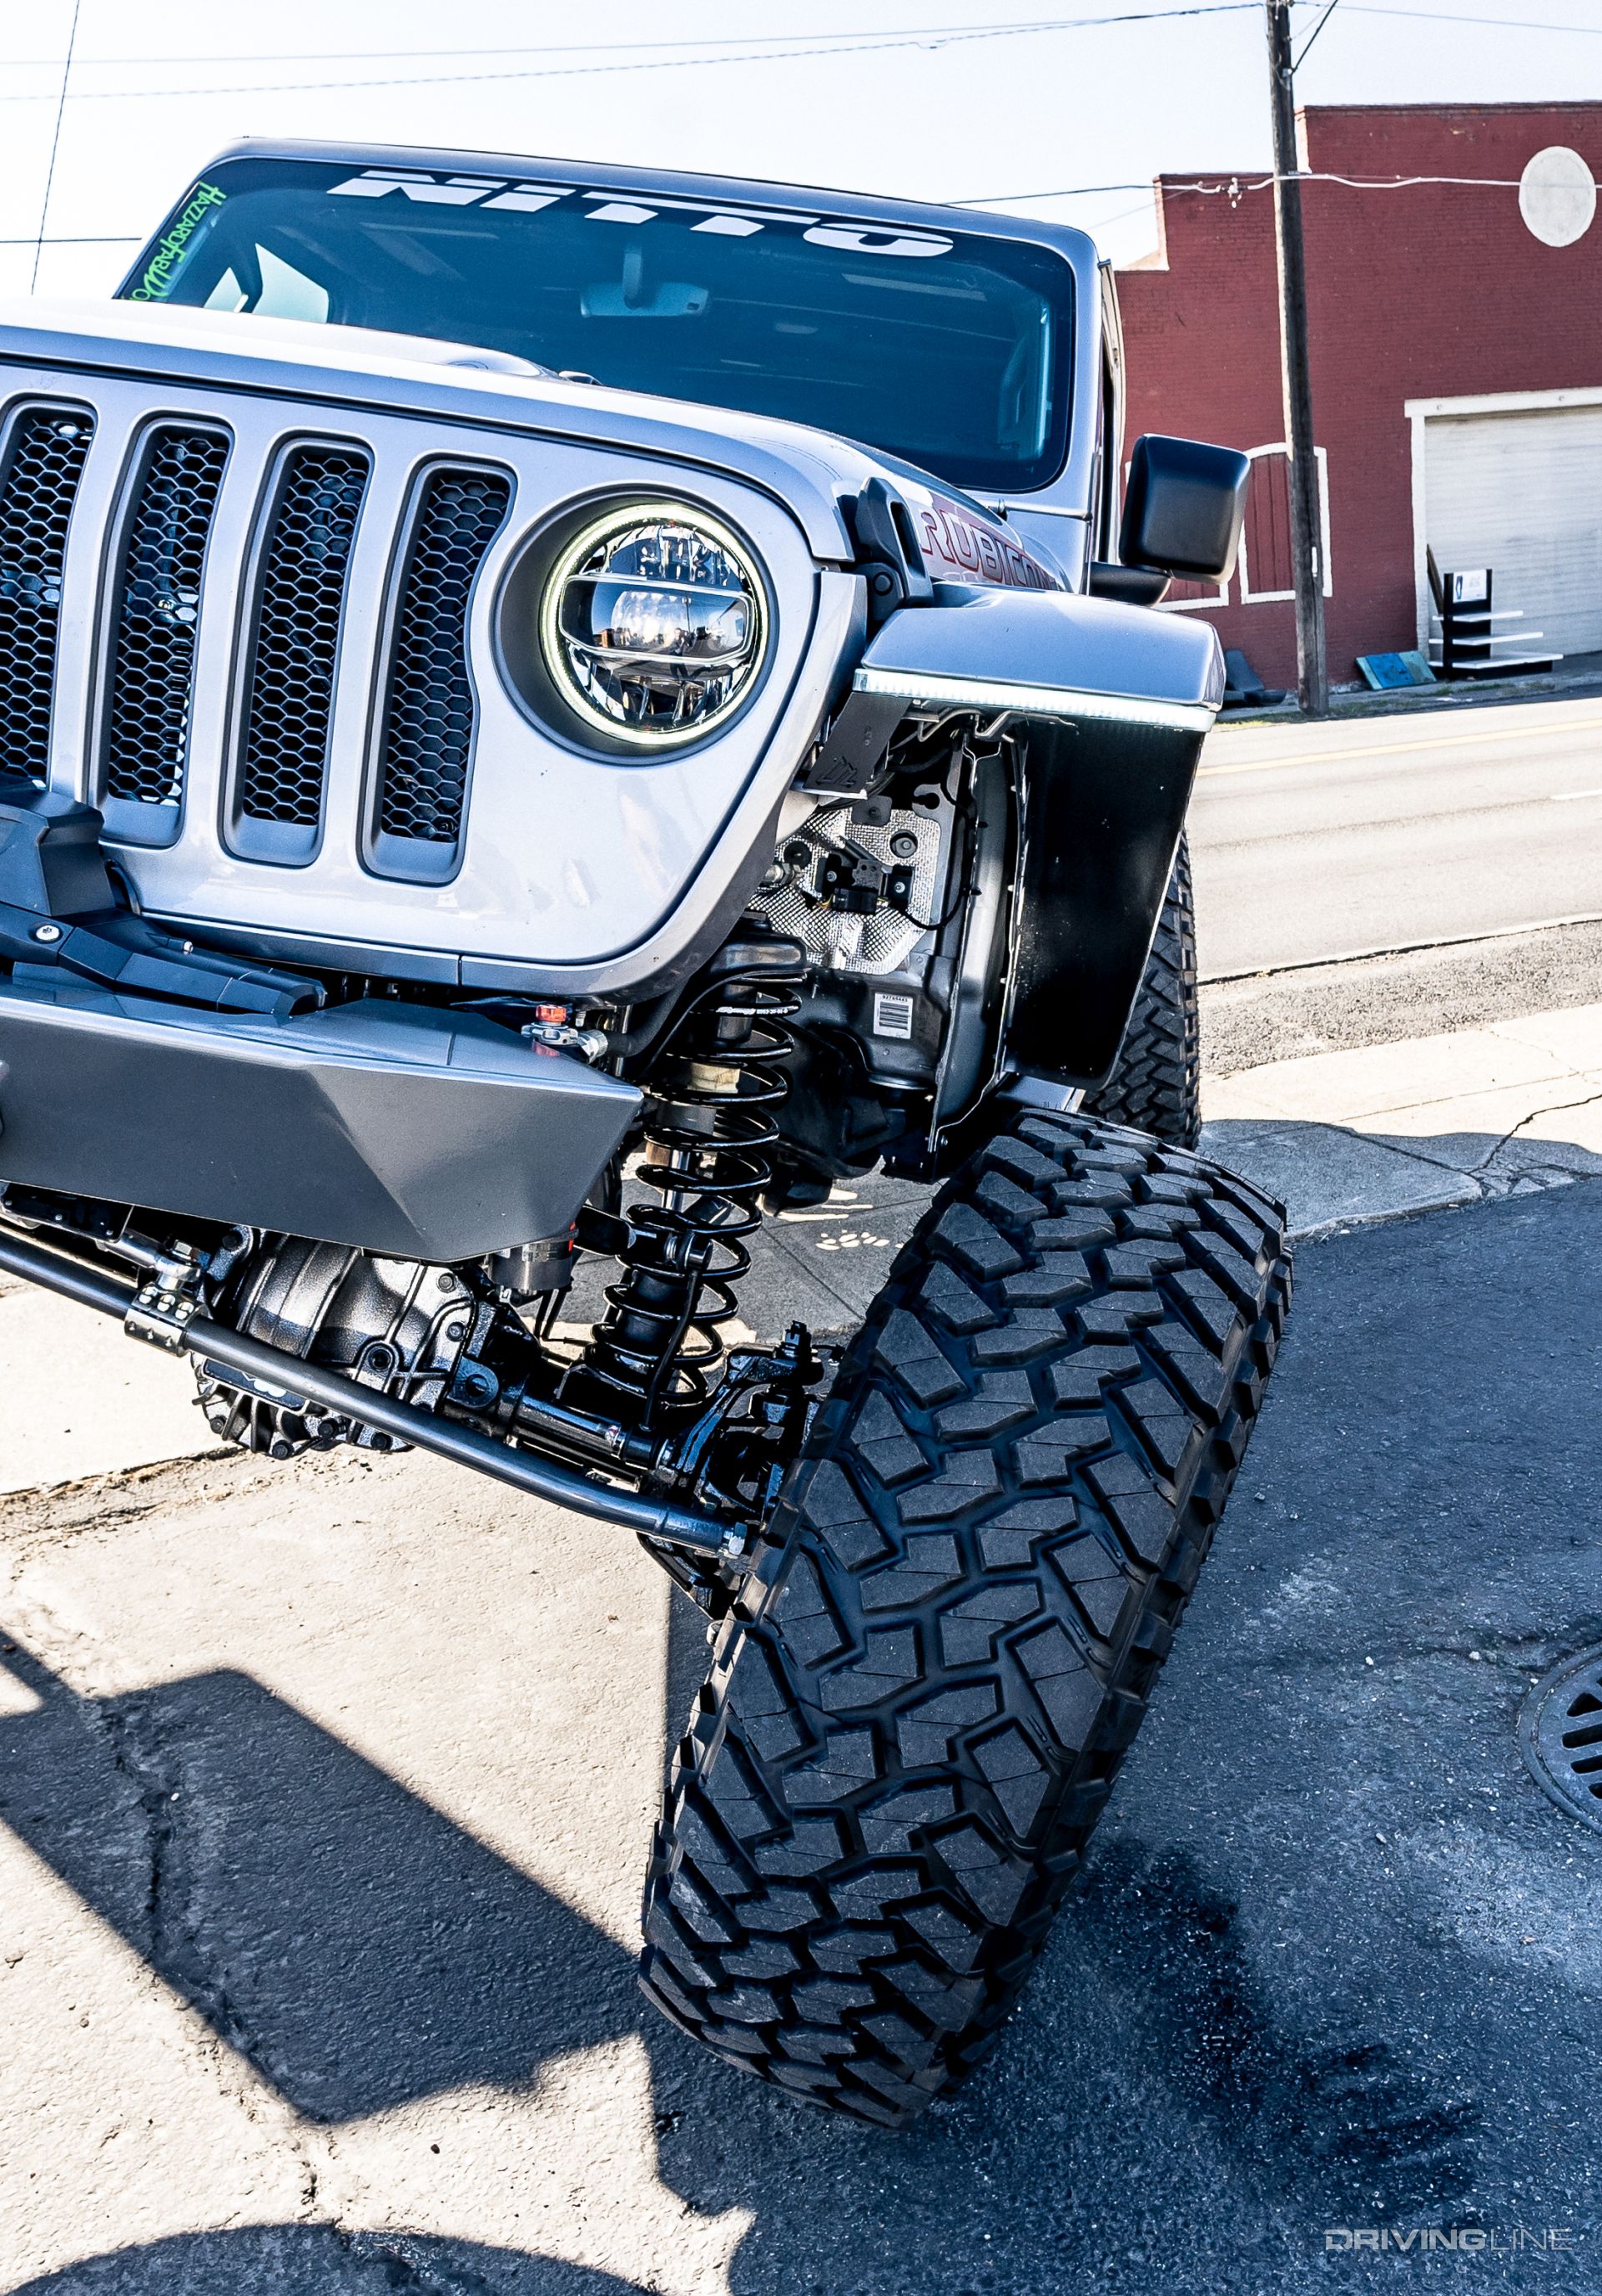 Jeep Lower Forty Wallpapers